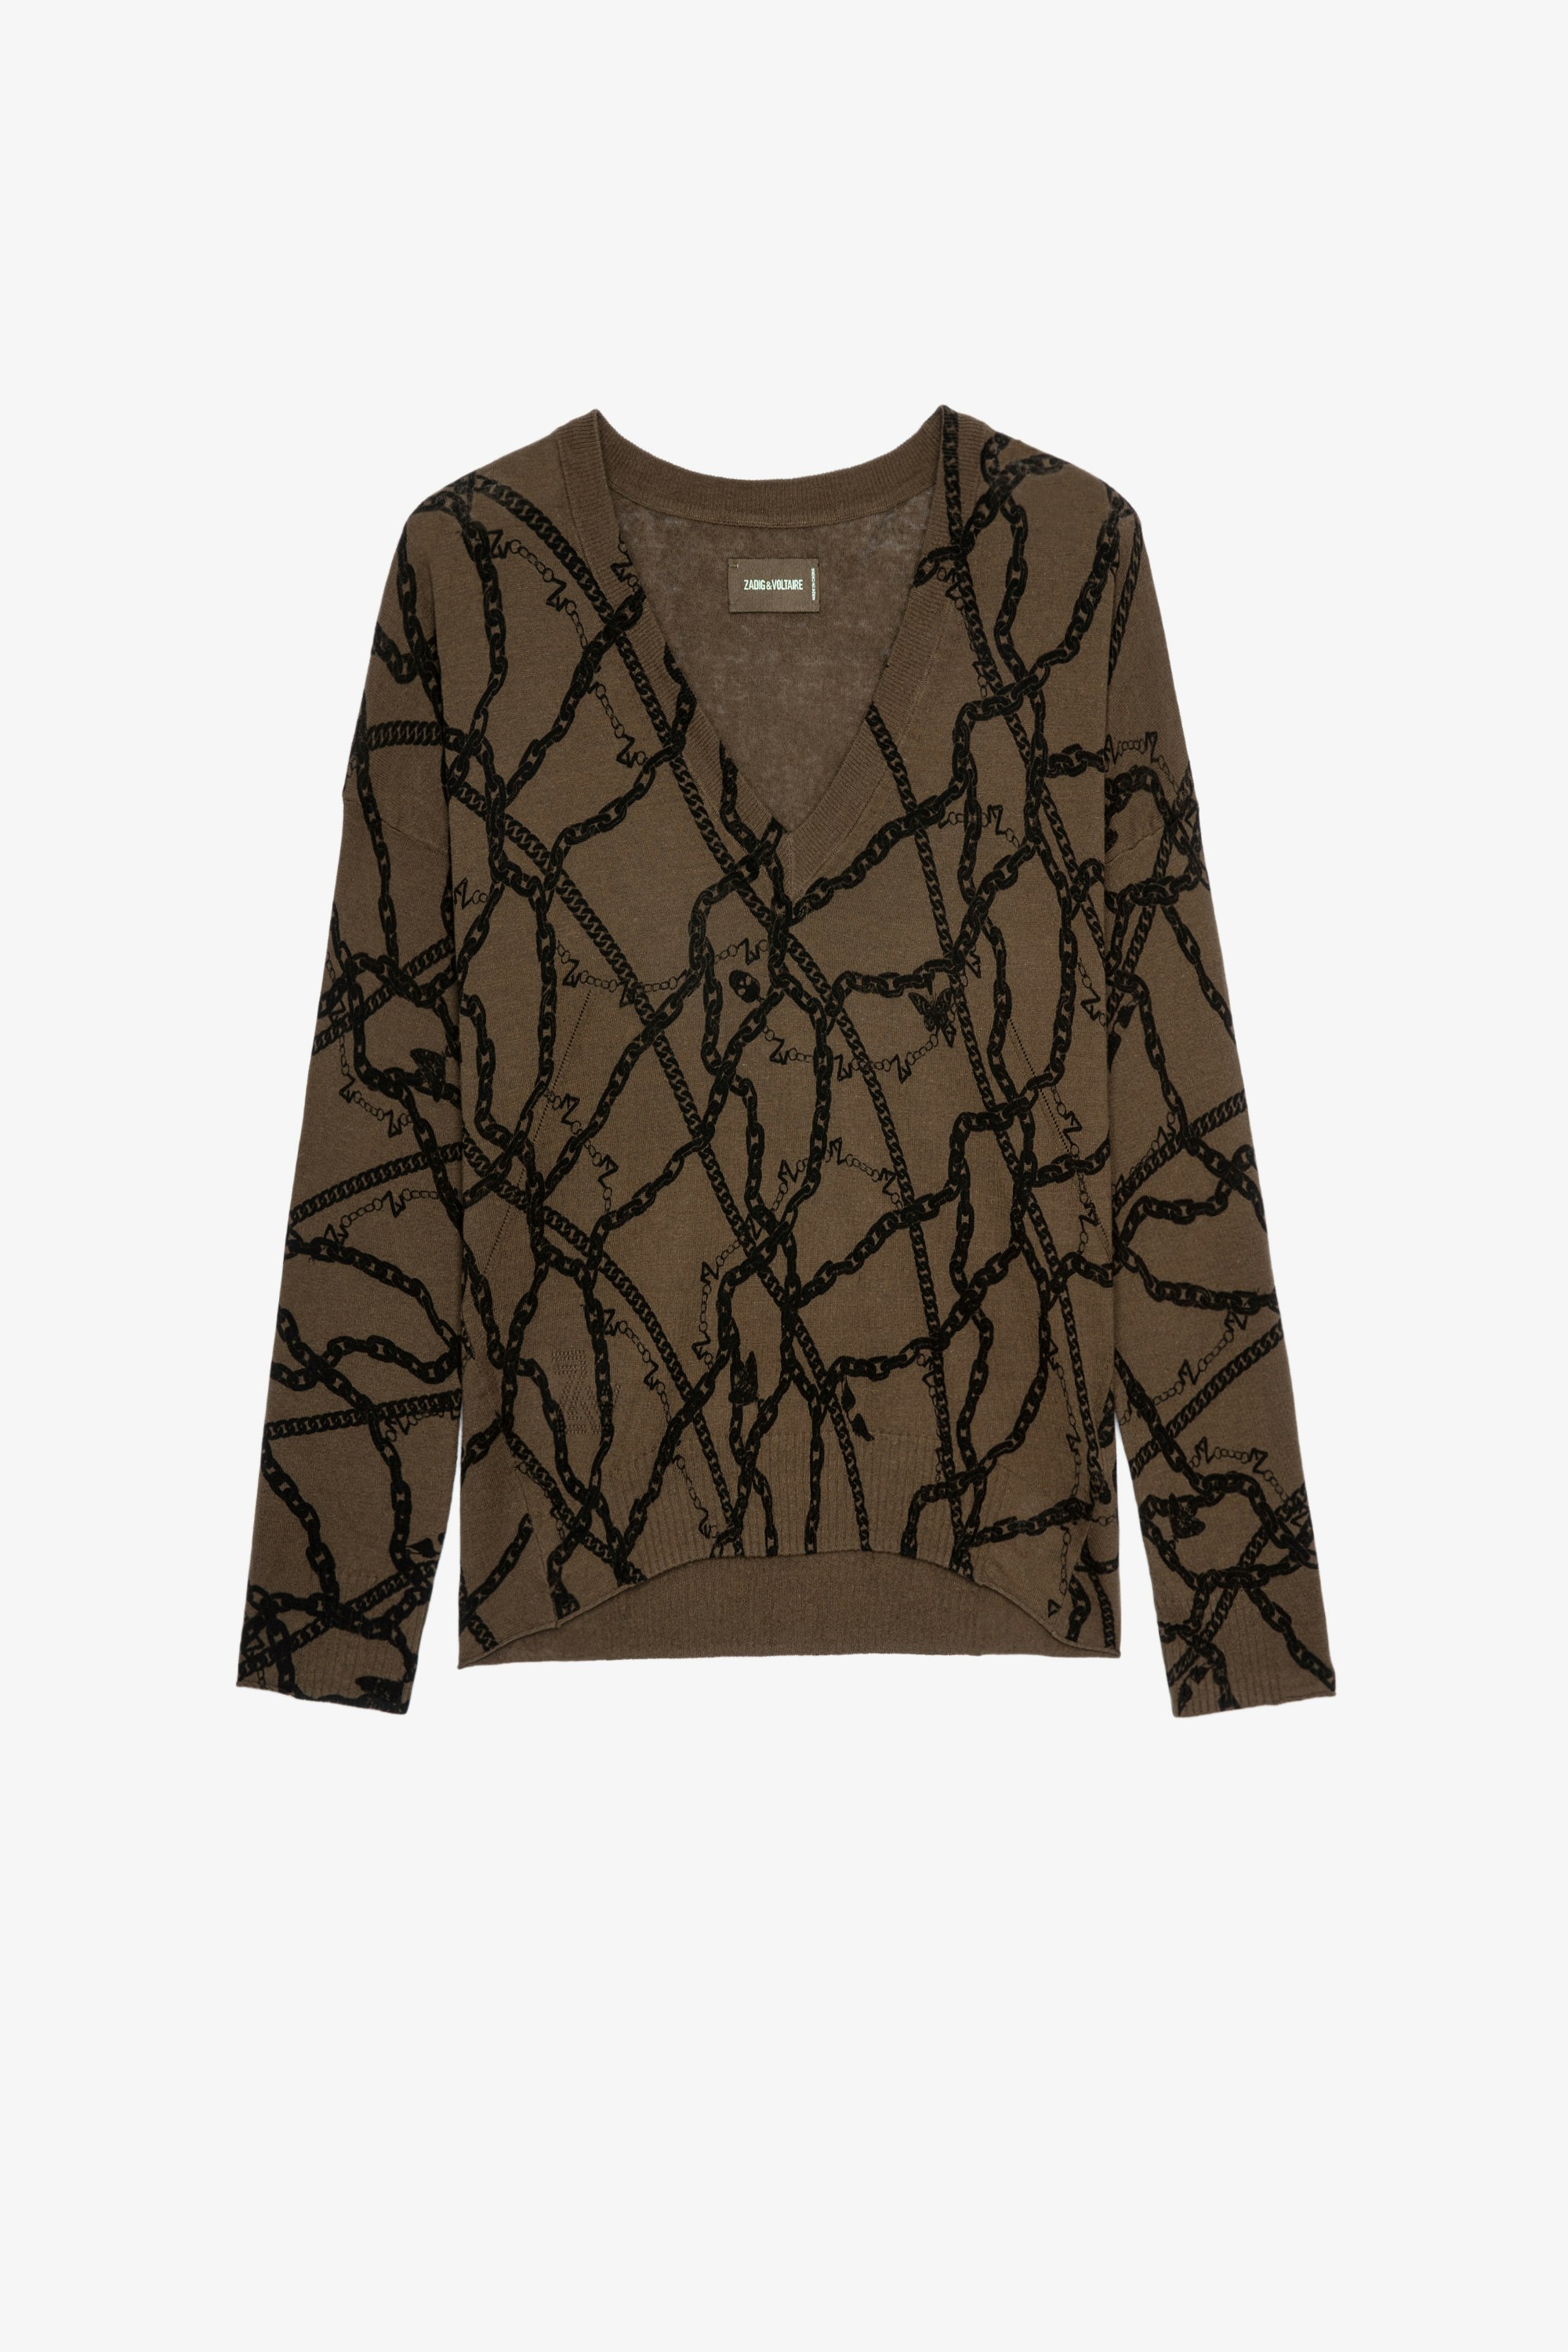 Brumy Chains Jumper Women's bronze linen and cotton jumper with chain print 